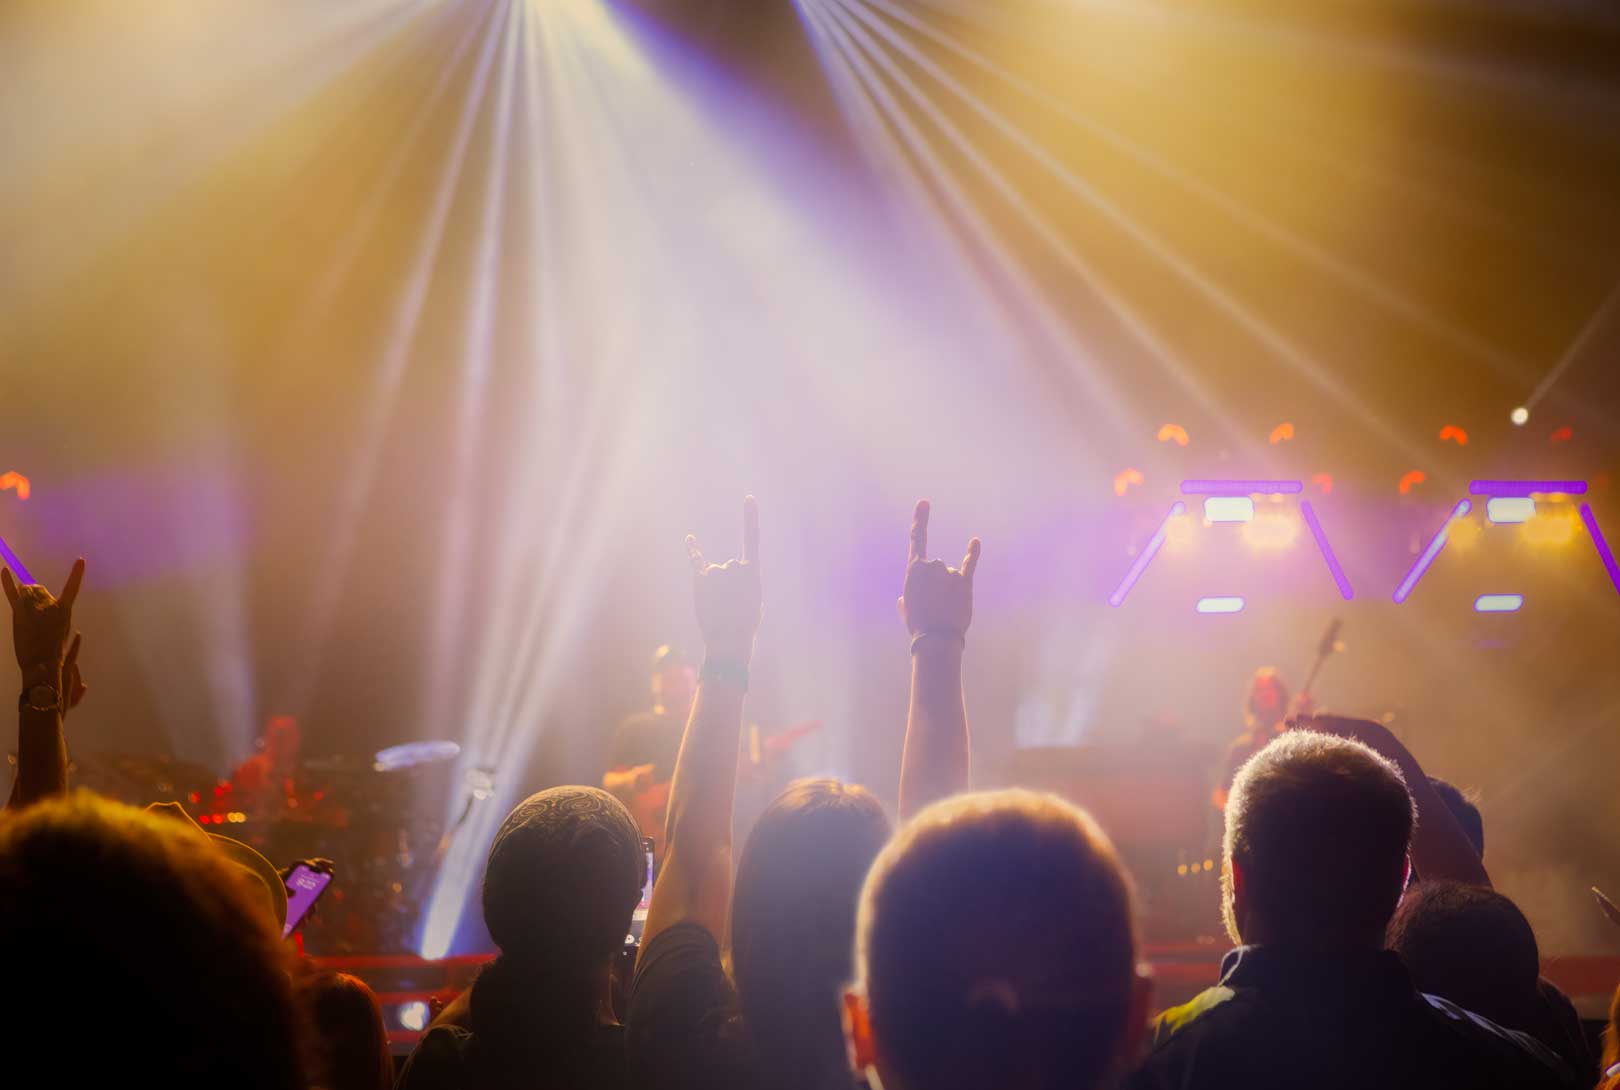 An Audience At A Live Music Concert